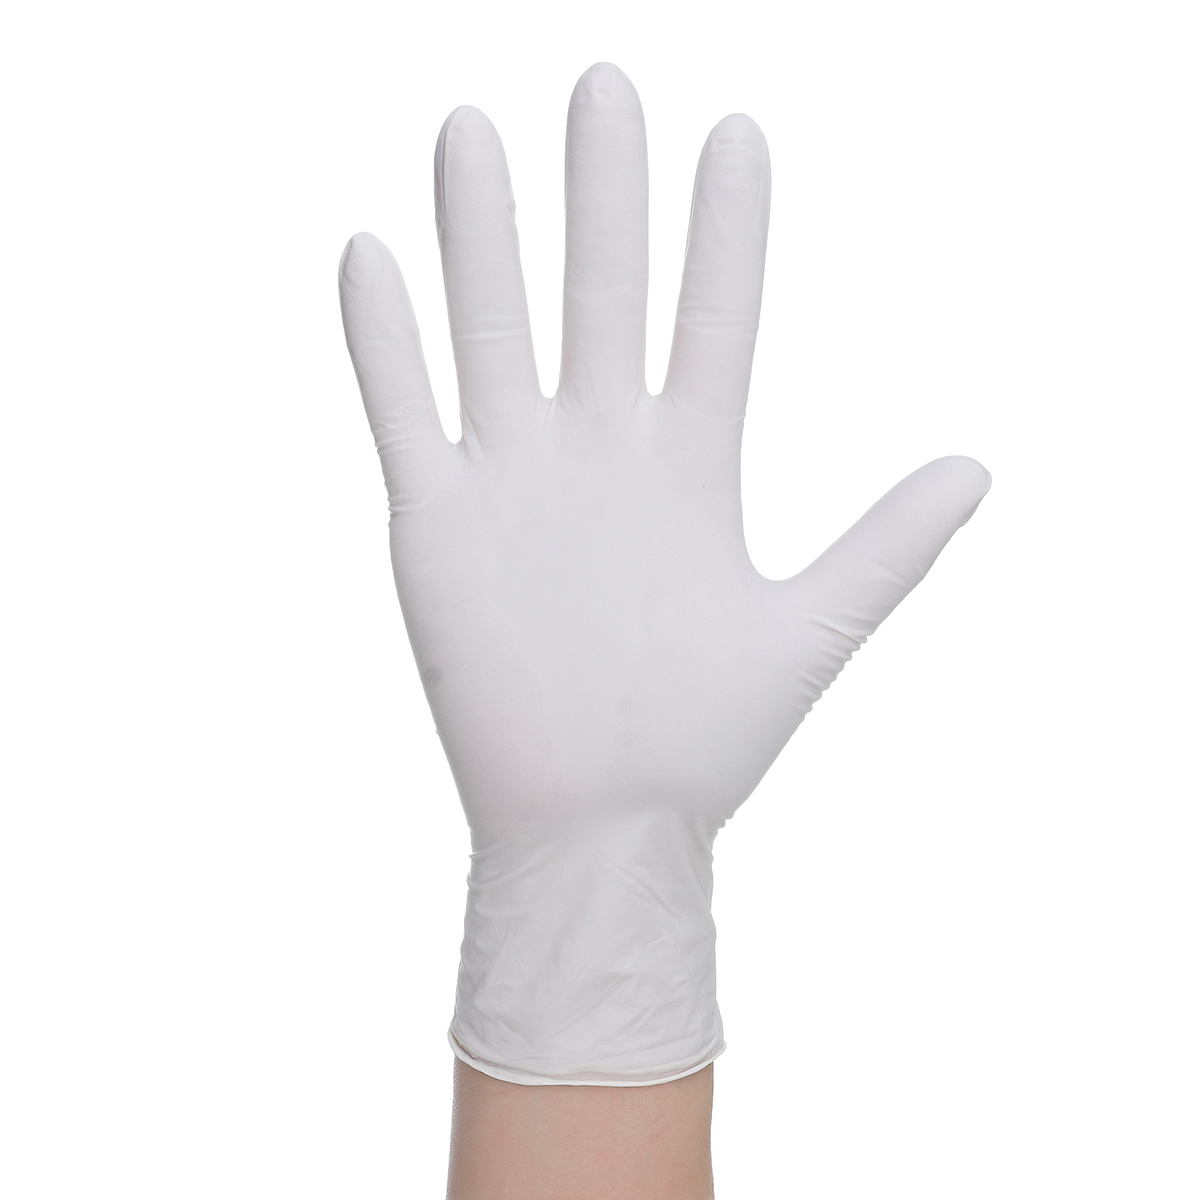 50Pairs-100Pcs-SML-Powder-Free-White-Disposable-Nitrile-Gloves-Suitable-For-Restaurant-Kitchen-Food--1688643-4